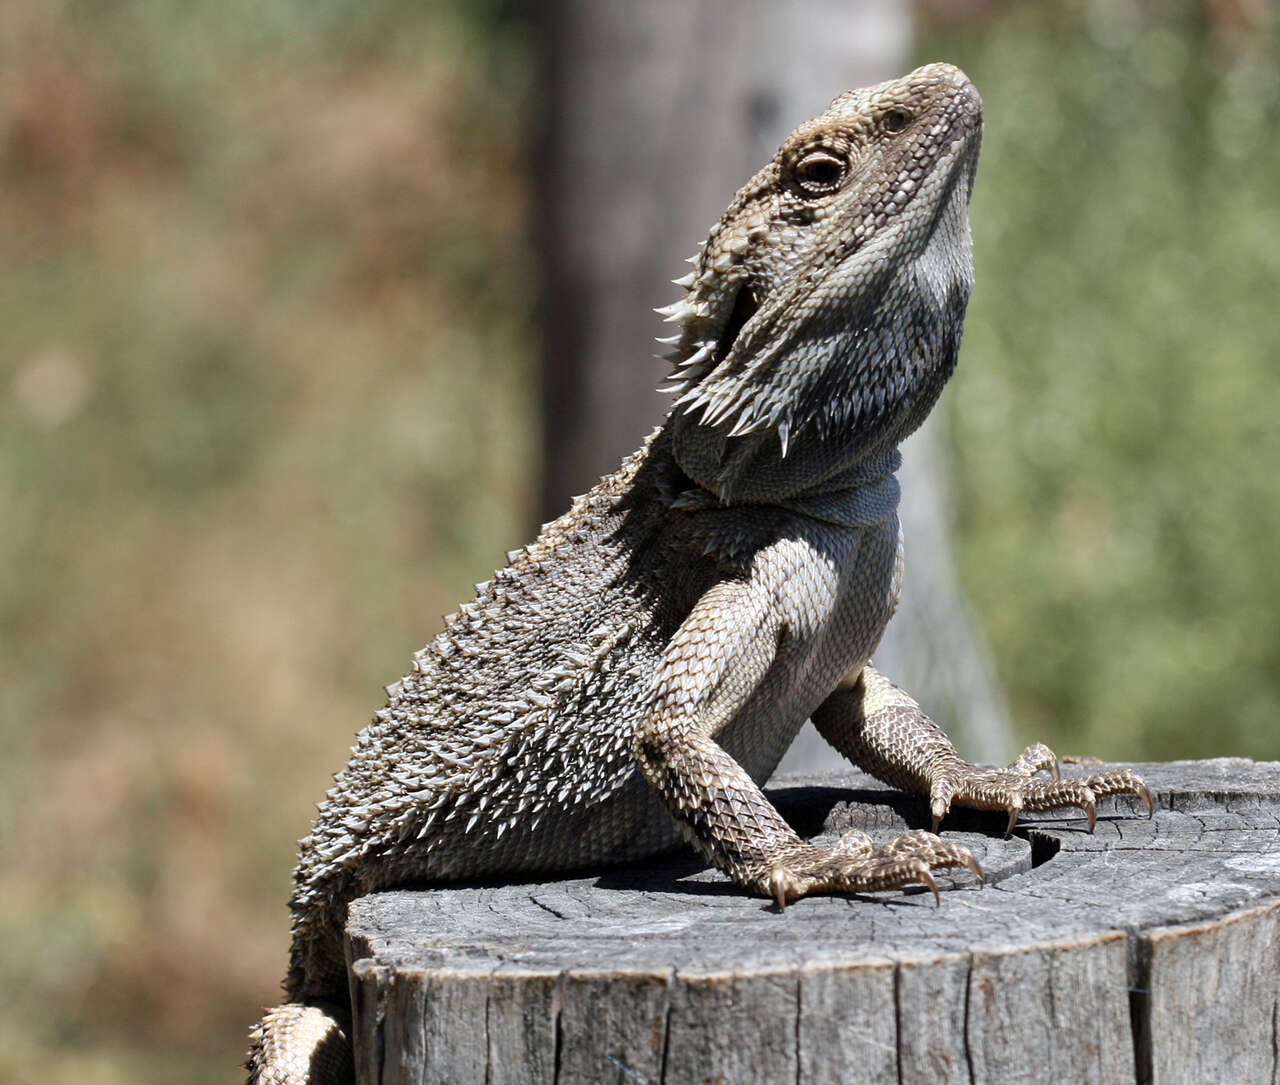 Image of Bearded Dragons